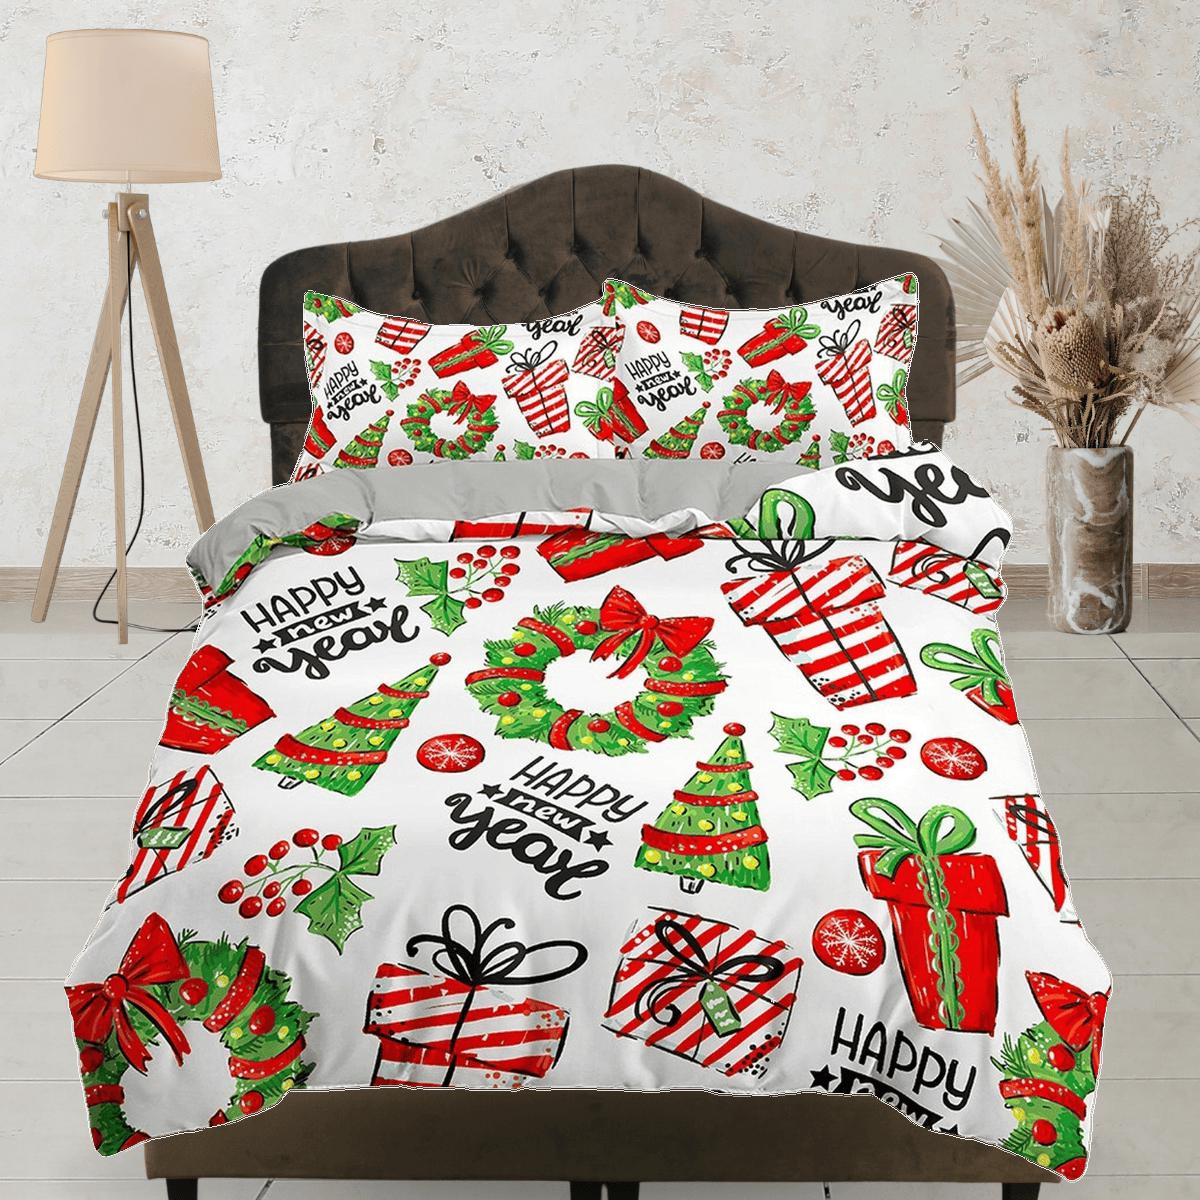 daintyduvet Holiday gifts and decors duvet cover set, christmas full size bedding & pillowcase, college bedding, crib toddler bedding, holiday gift room